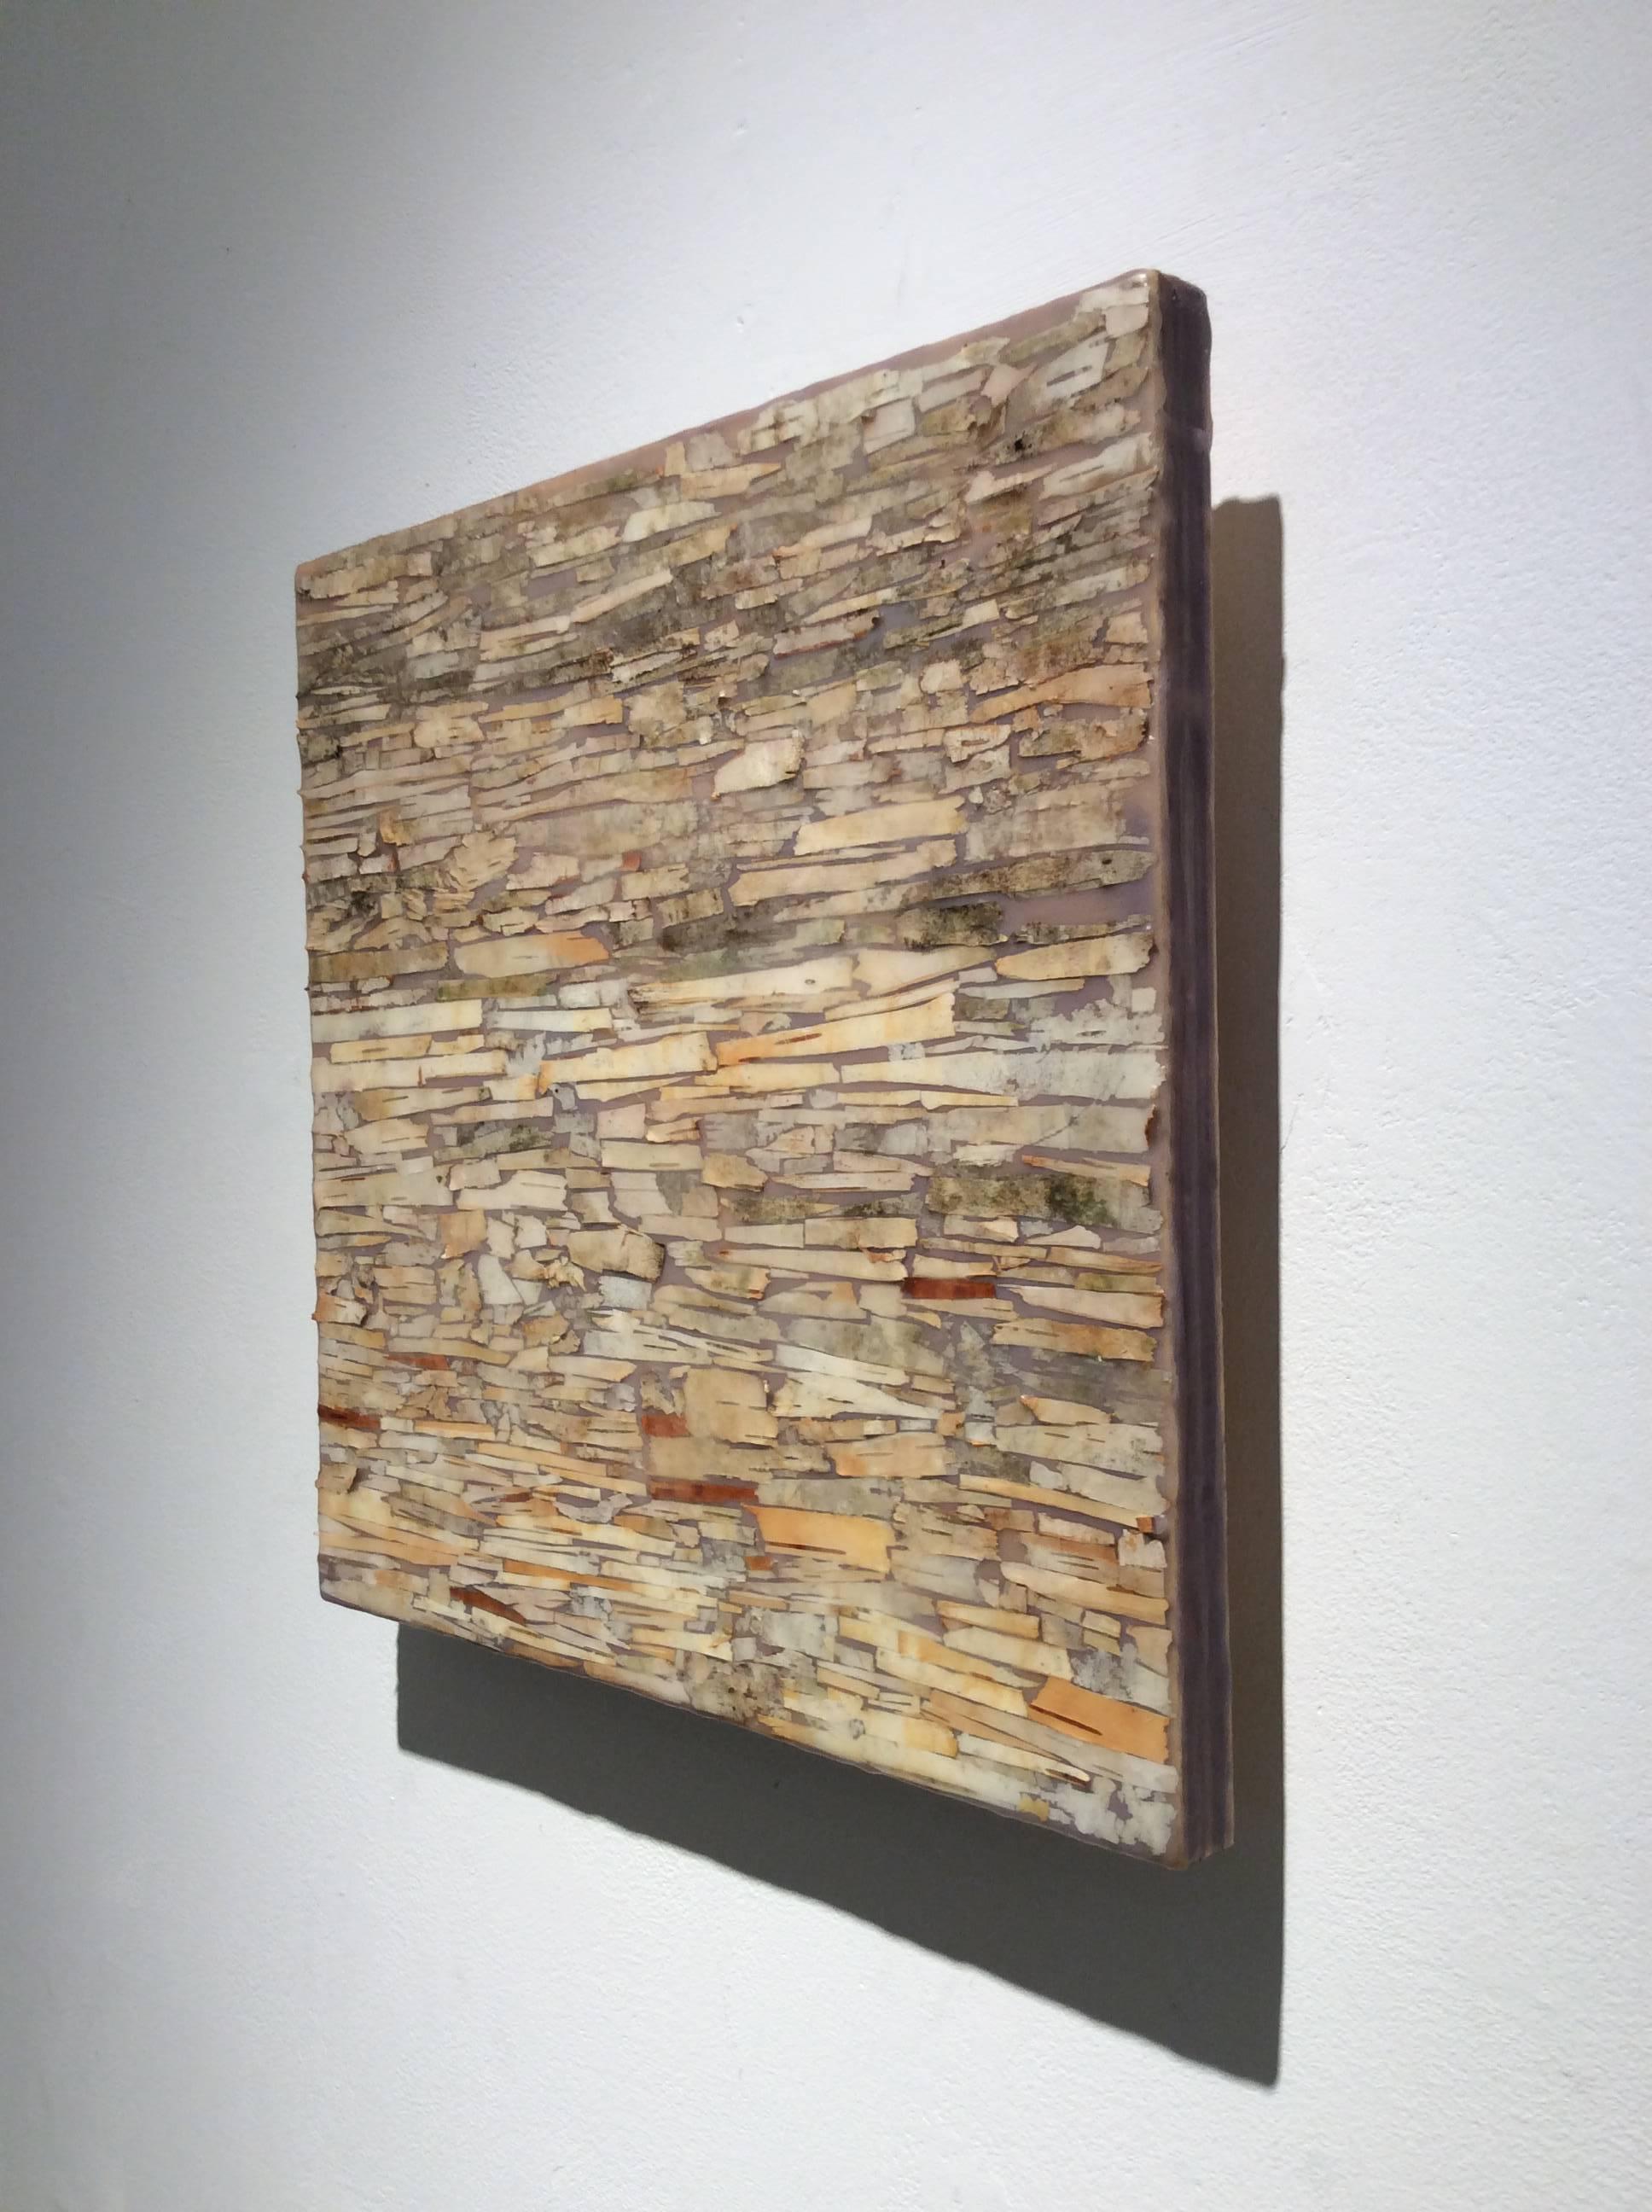 Abstract encaustic painting with assorted neutral toned birch bark on wood panel
12 x 12 x 1.5 inches

This modern abstract encaustic painting by Allyson Levy is made with assorted beige, tan, and sienna orange birch bark encased in a layer of